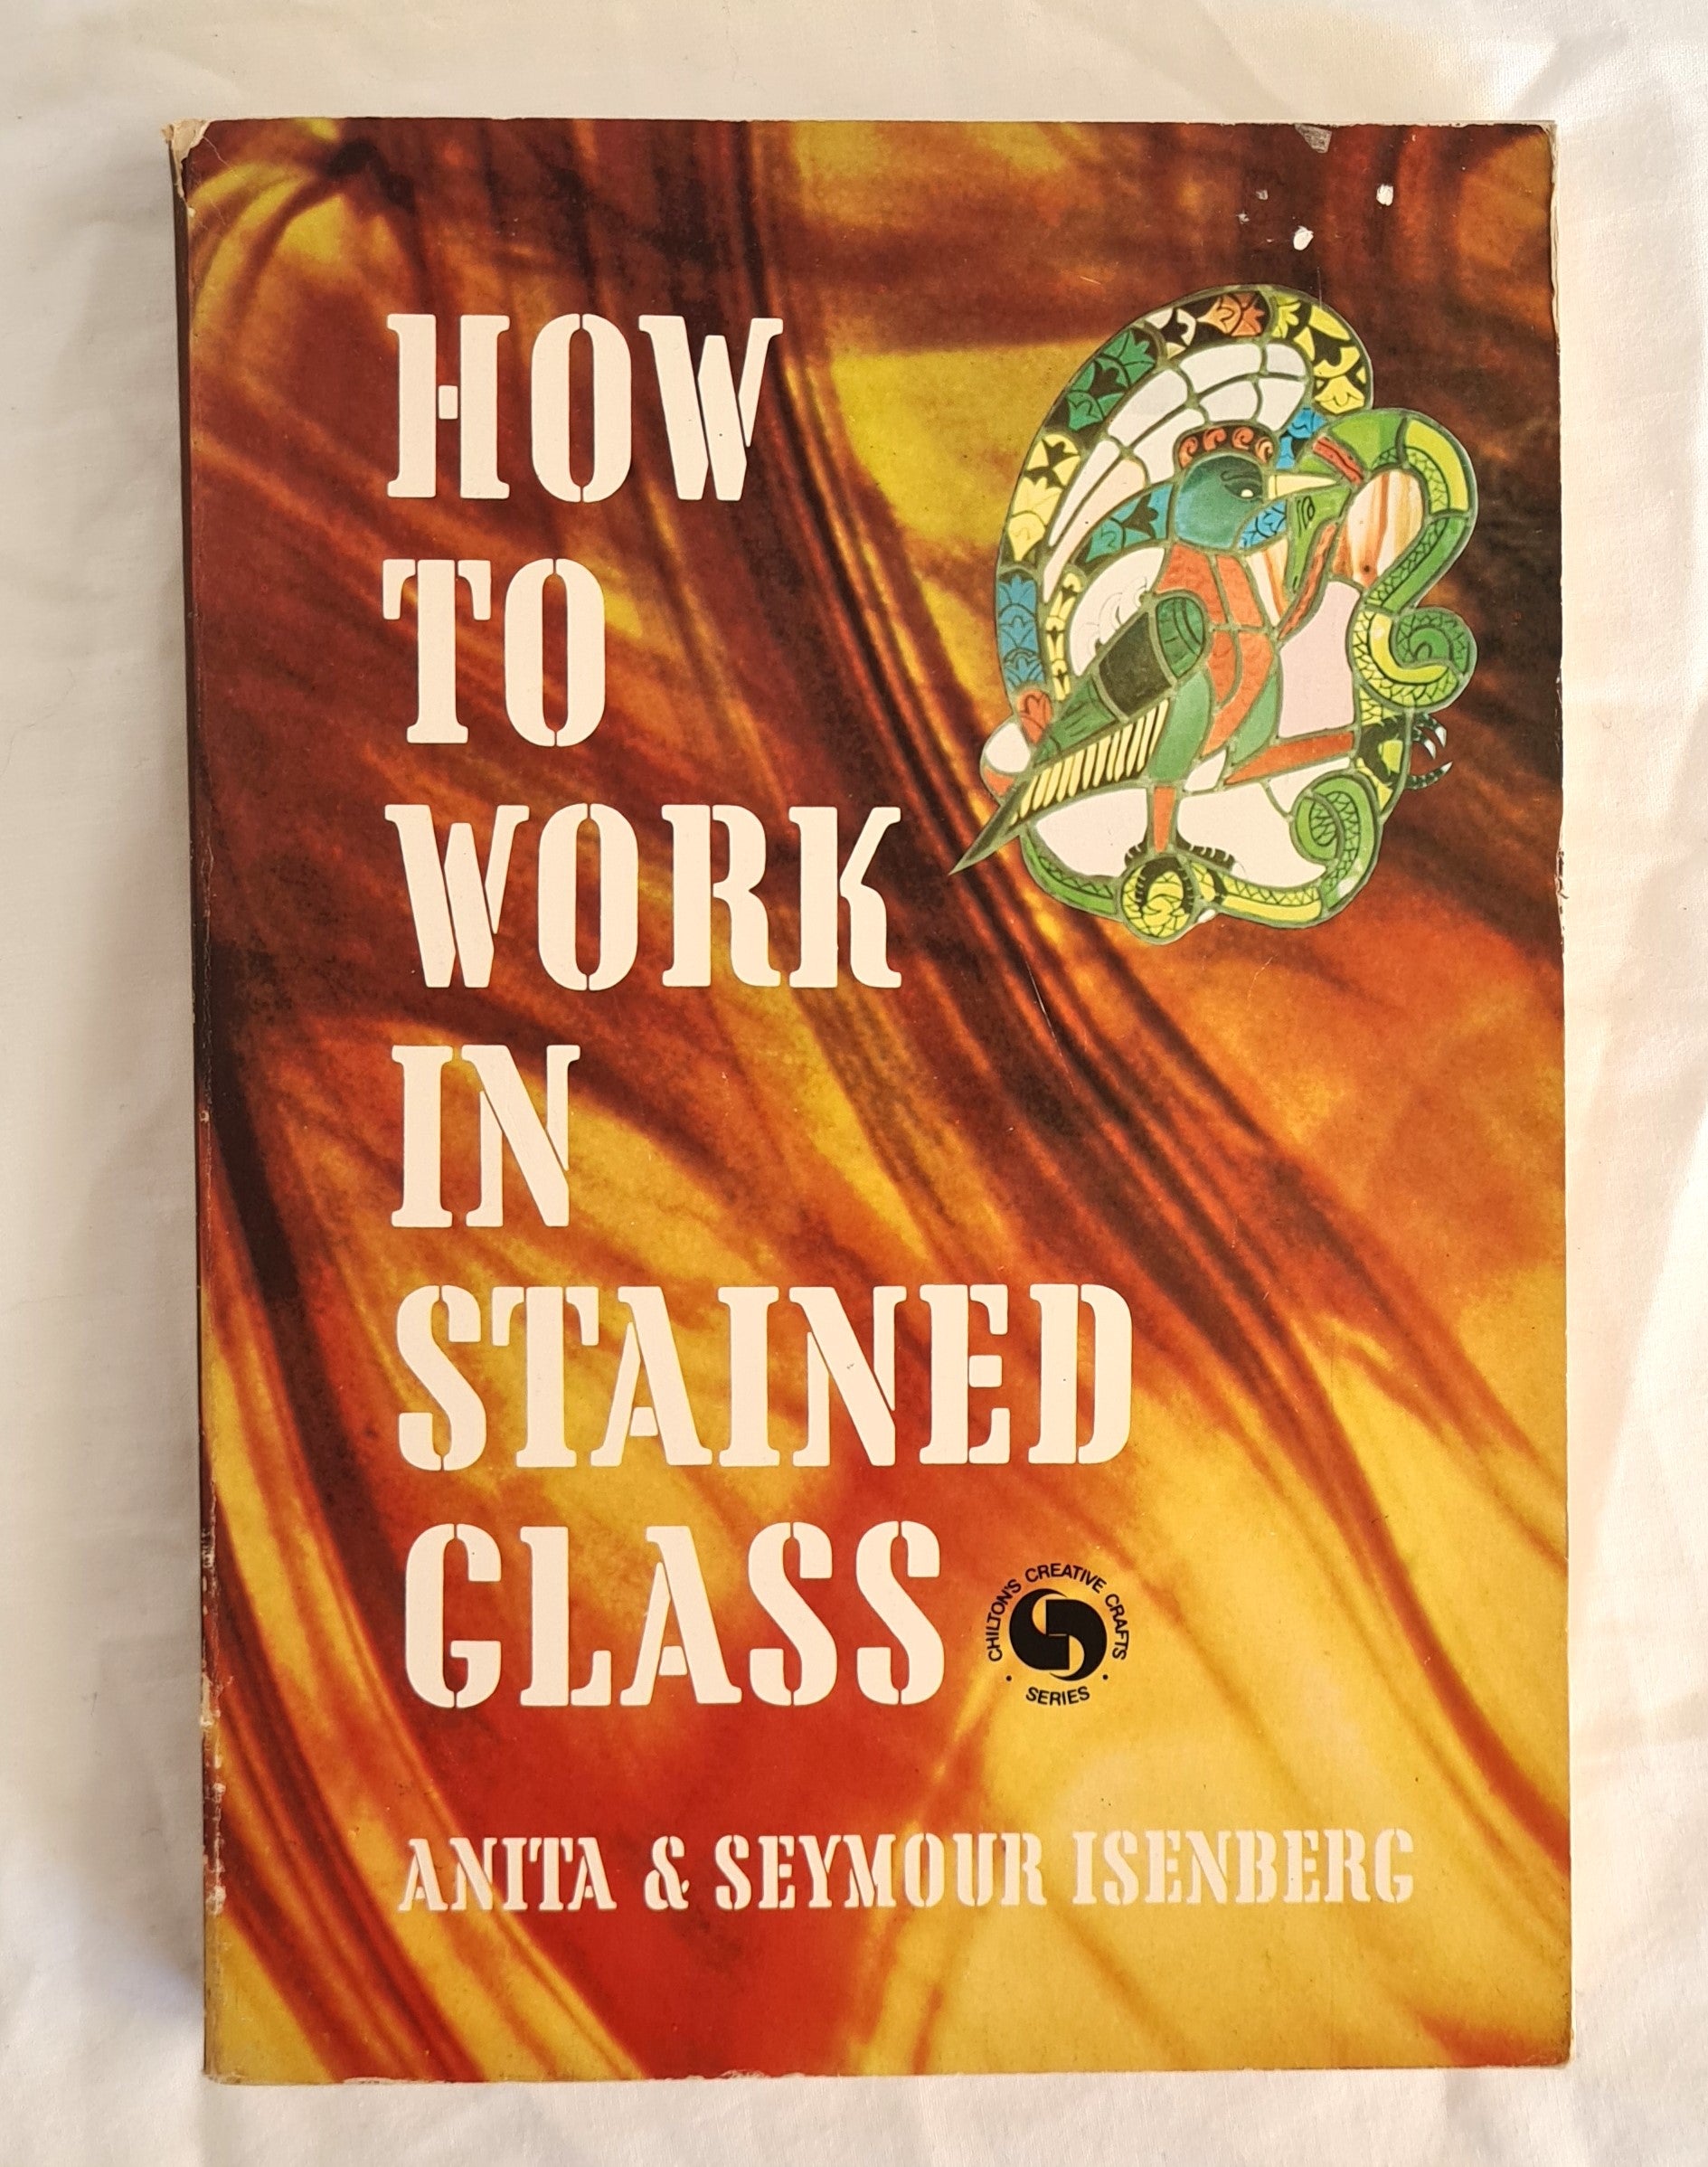 How to Work in Stained Glass  by Anita and Seymour Isenberg